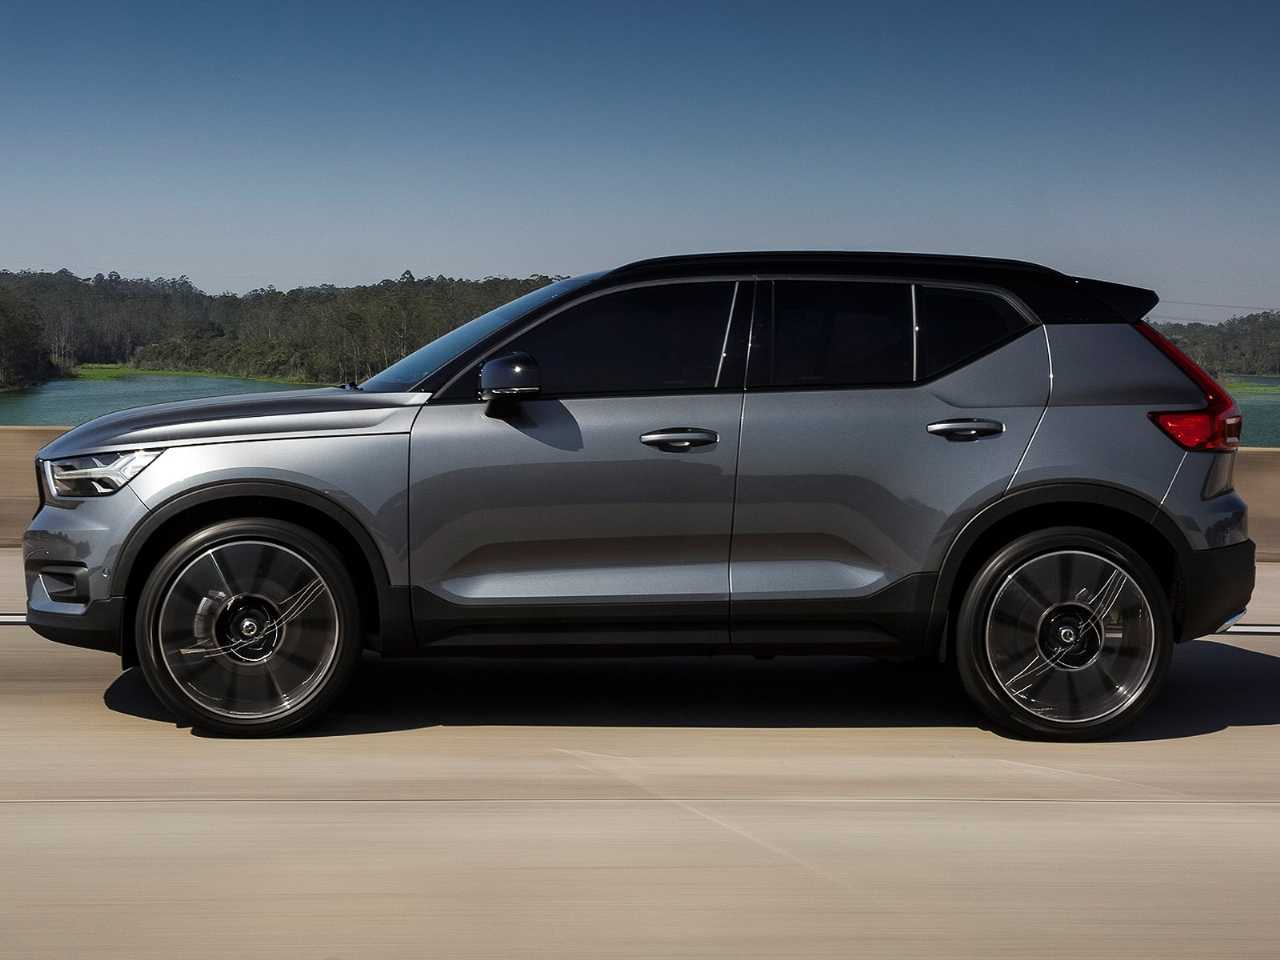 VolvoXC40 2020 - lateral